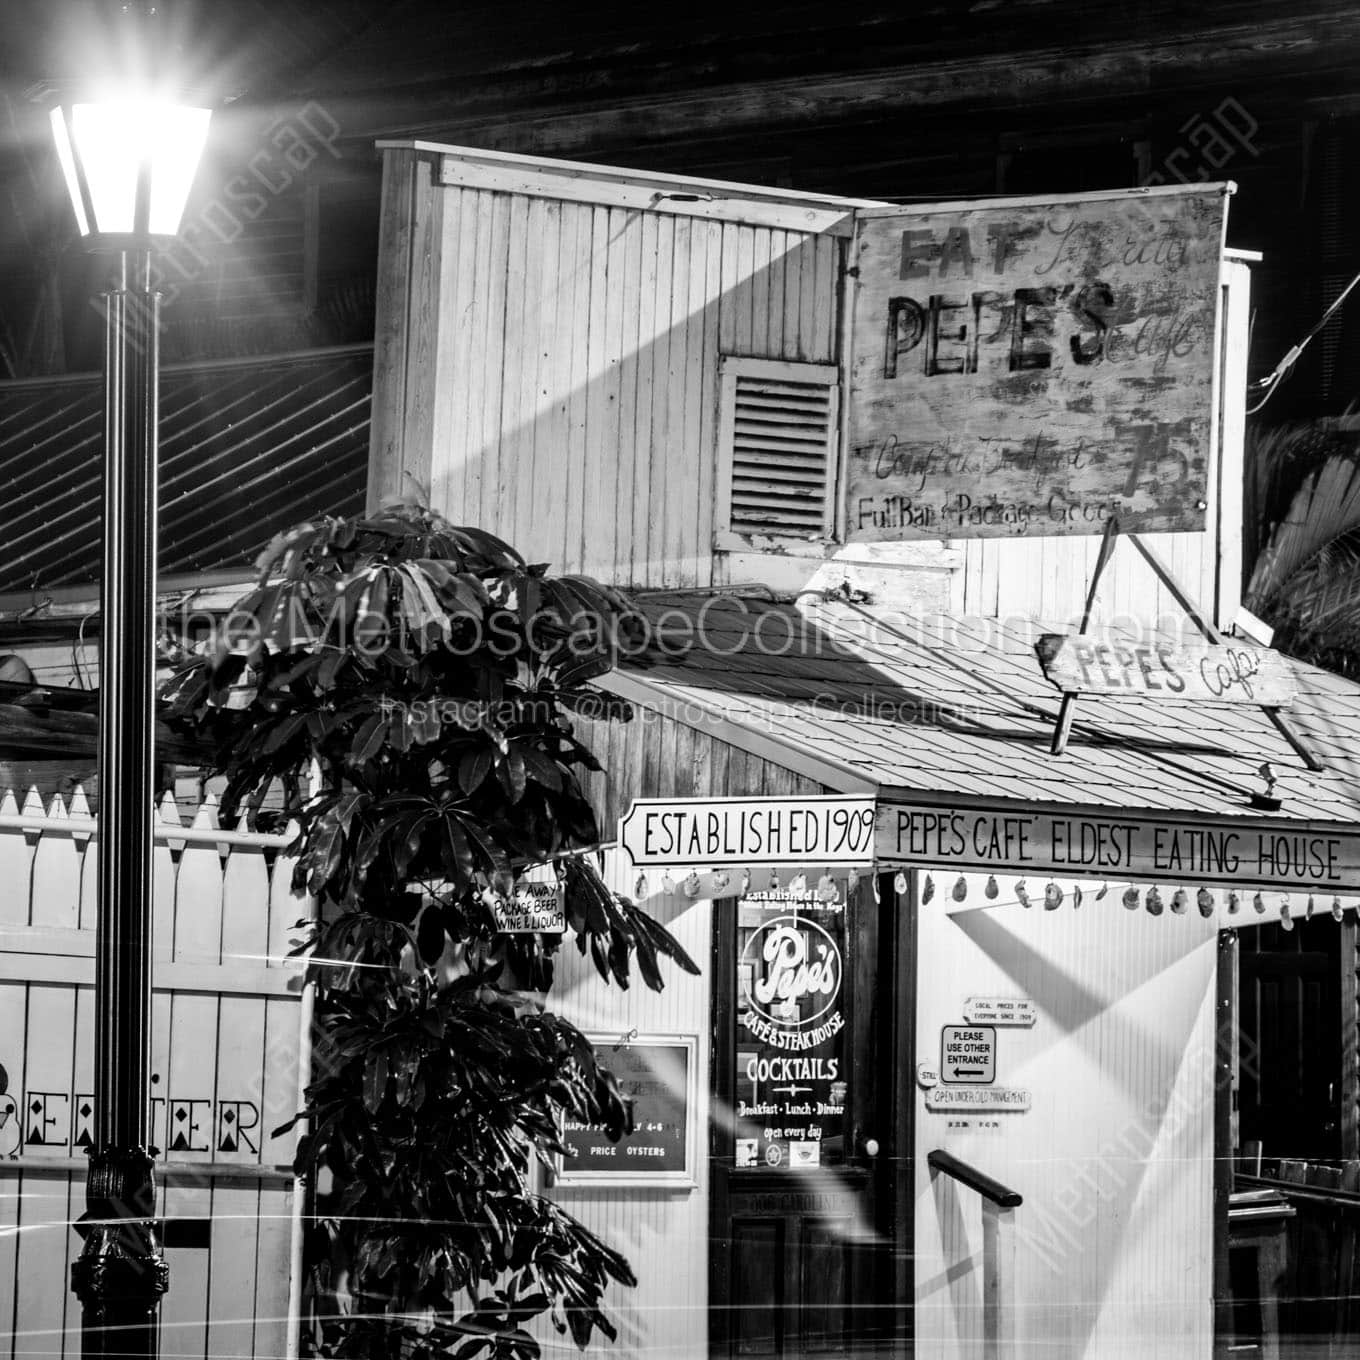 pepes cafe eating house at night Black & White Office Art